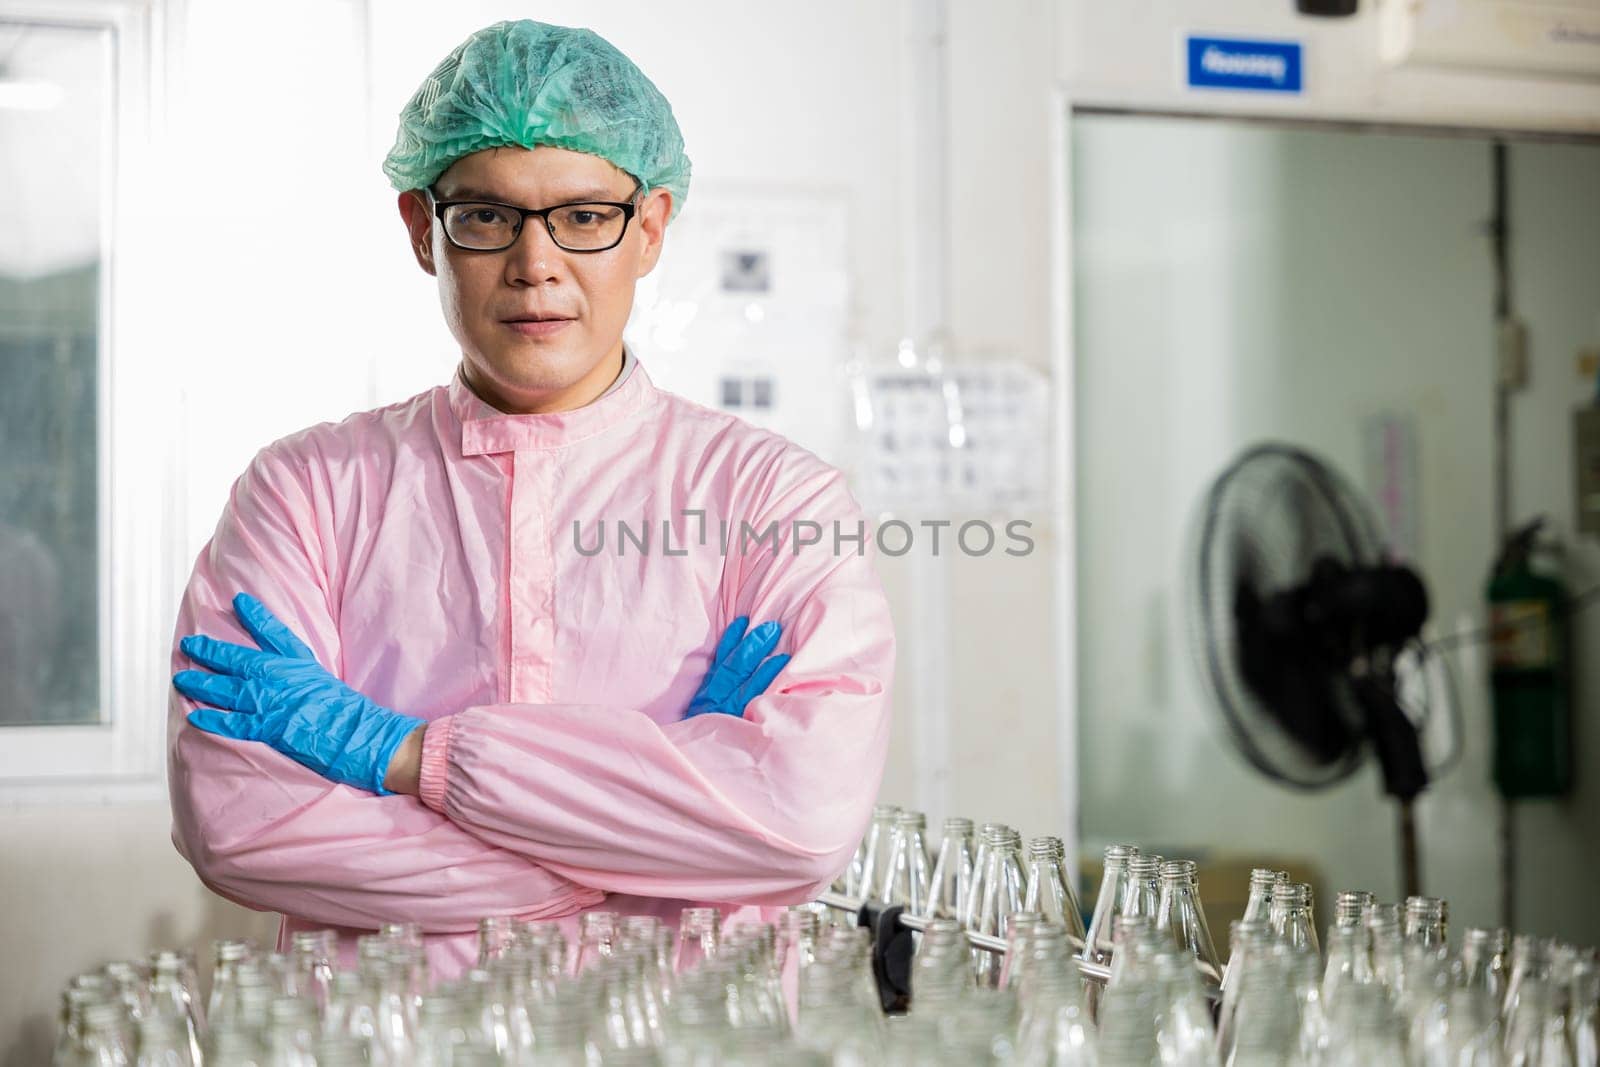 A man in a lab coat and blue gloves